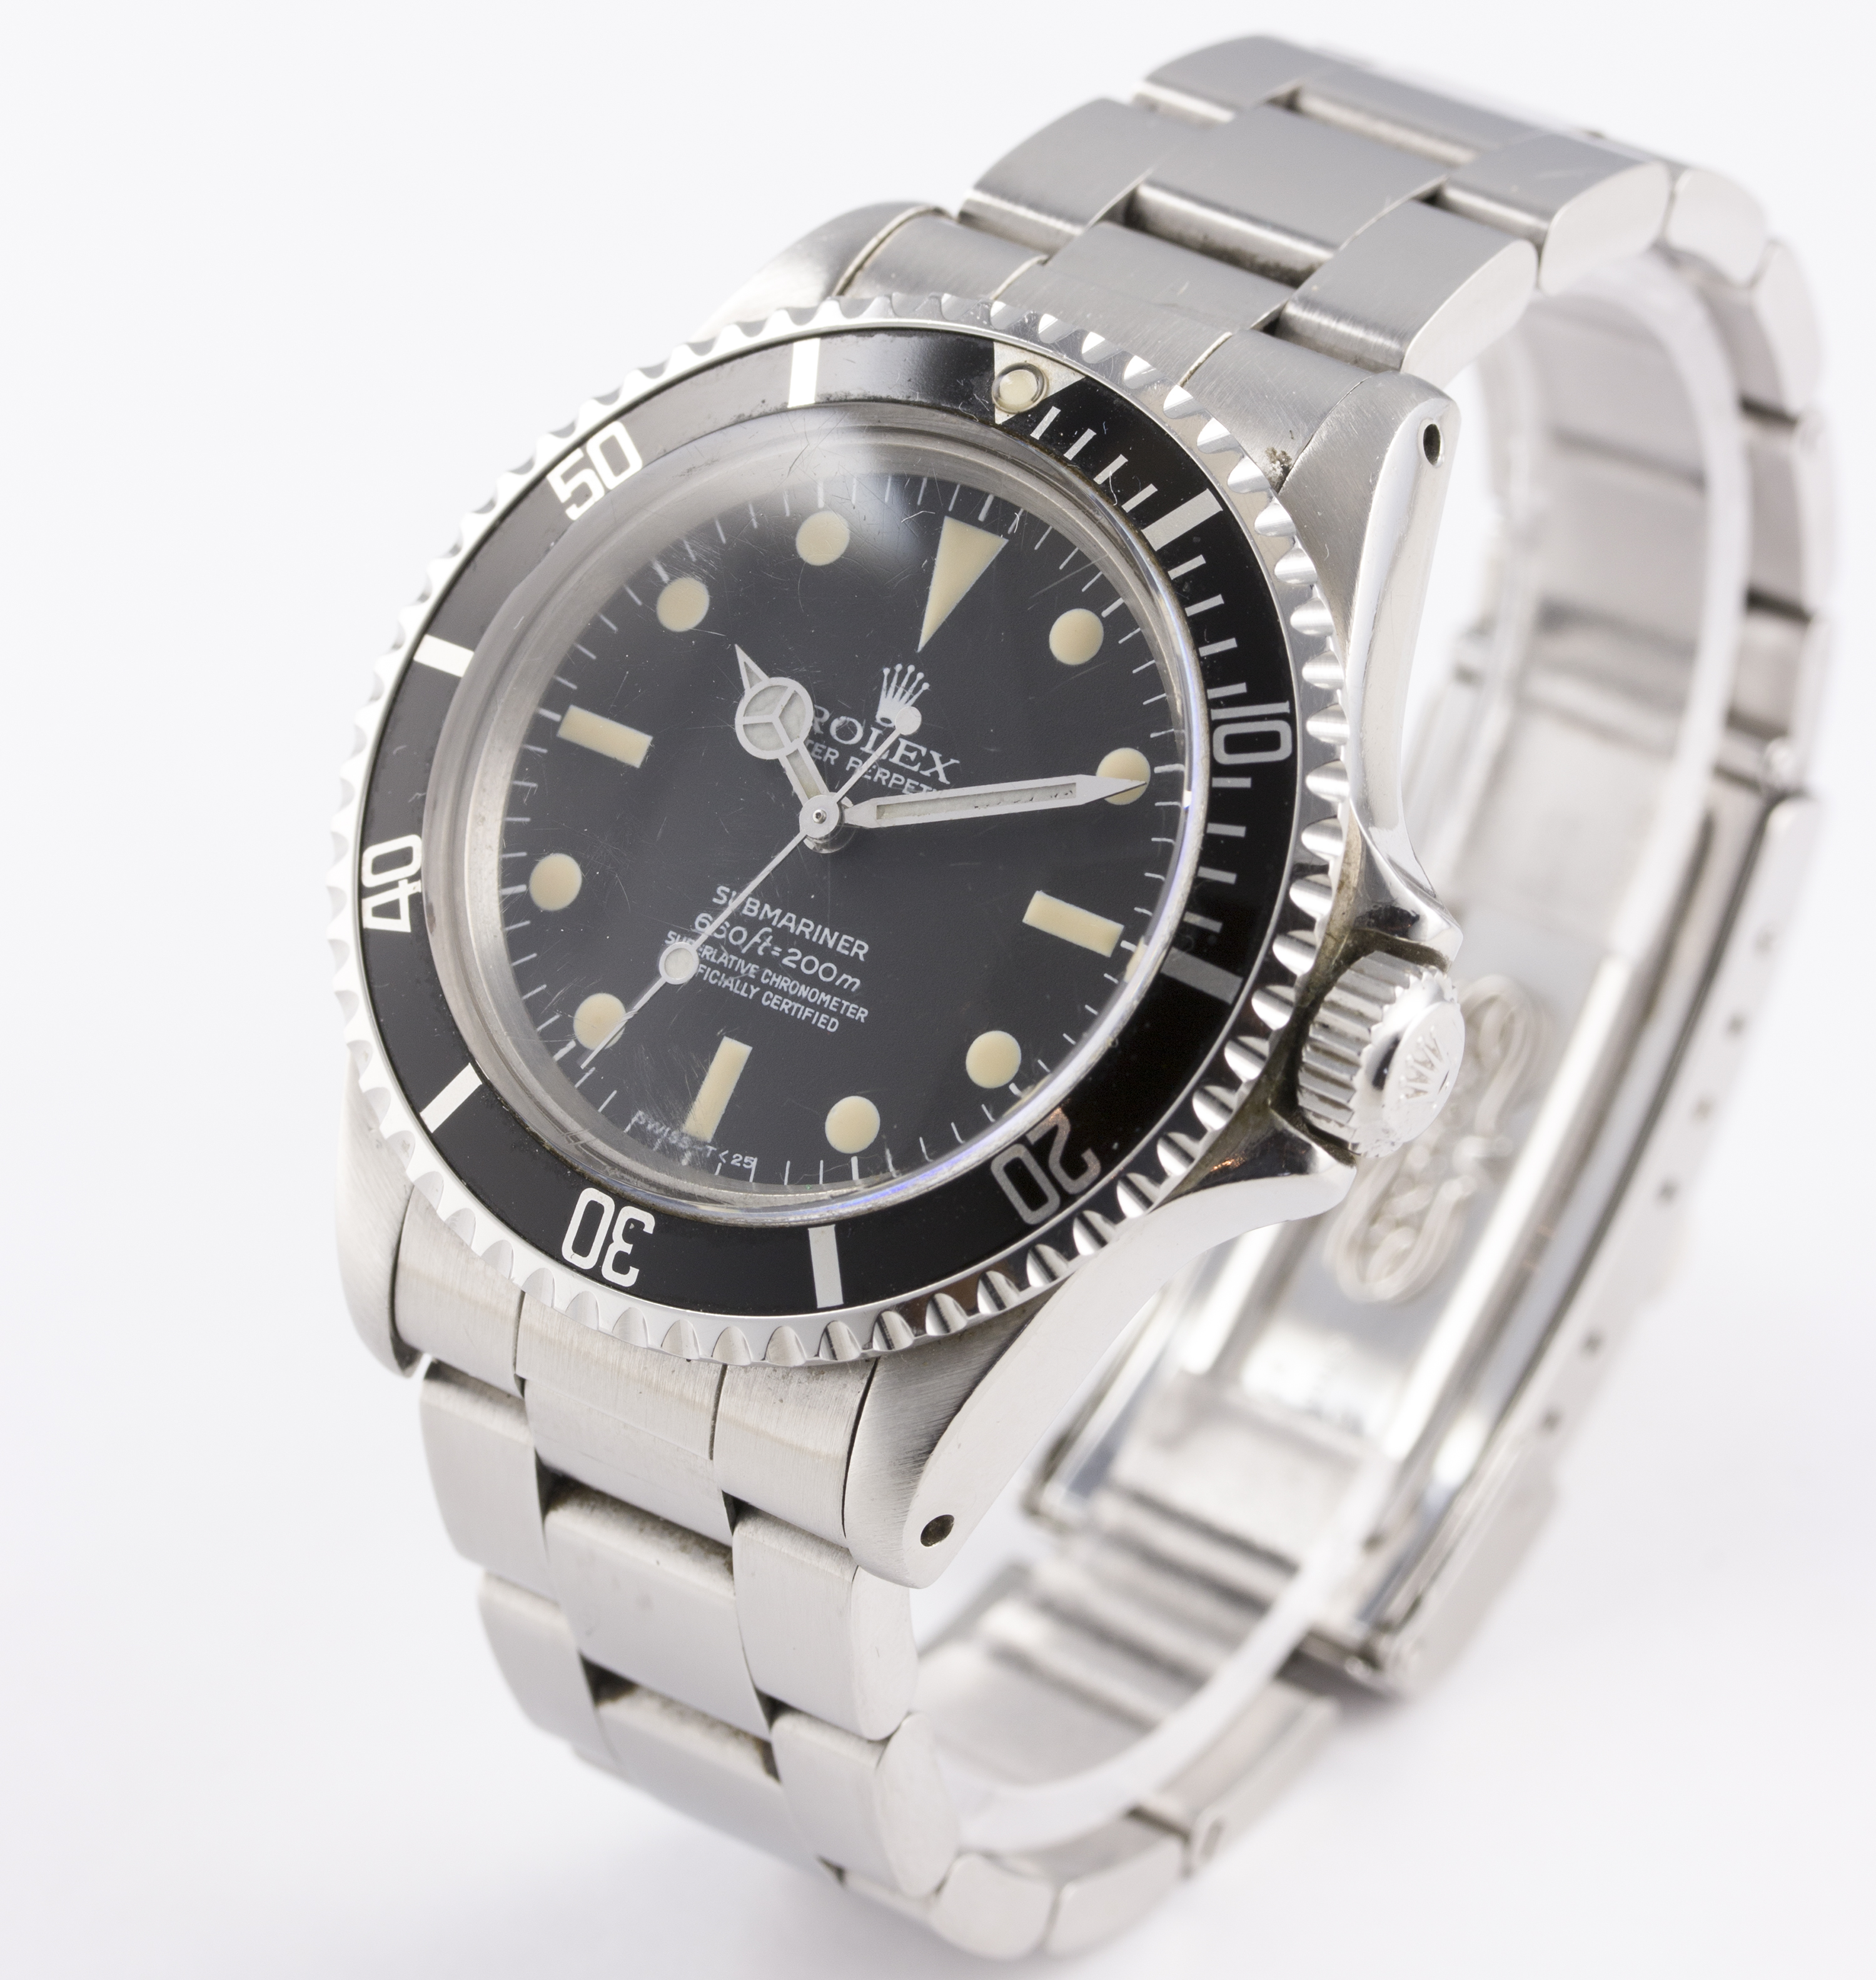 A GENTLEMAN'S STAINLESS STEEL ROLEX OYSTER PERPETUAL SUBMARINER CHRONOMETER BRACELET WATCH CIRCA - Image 4 of 9